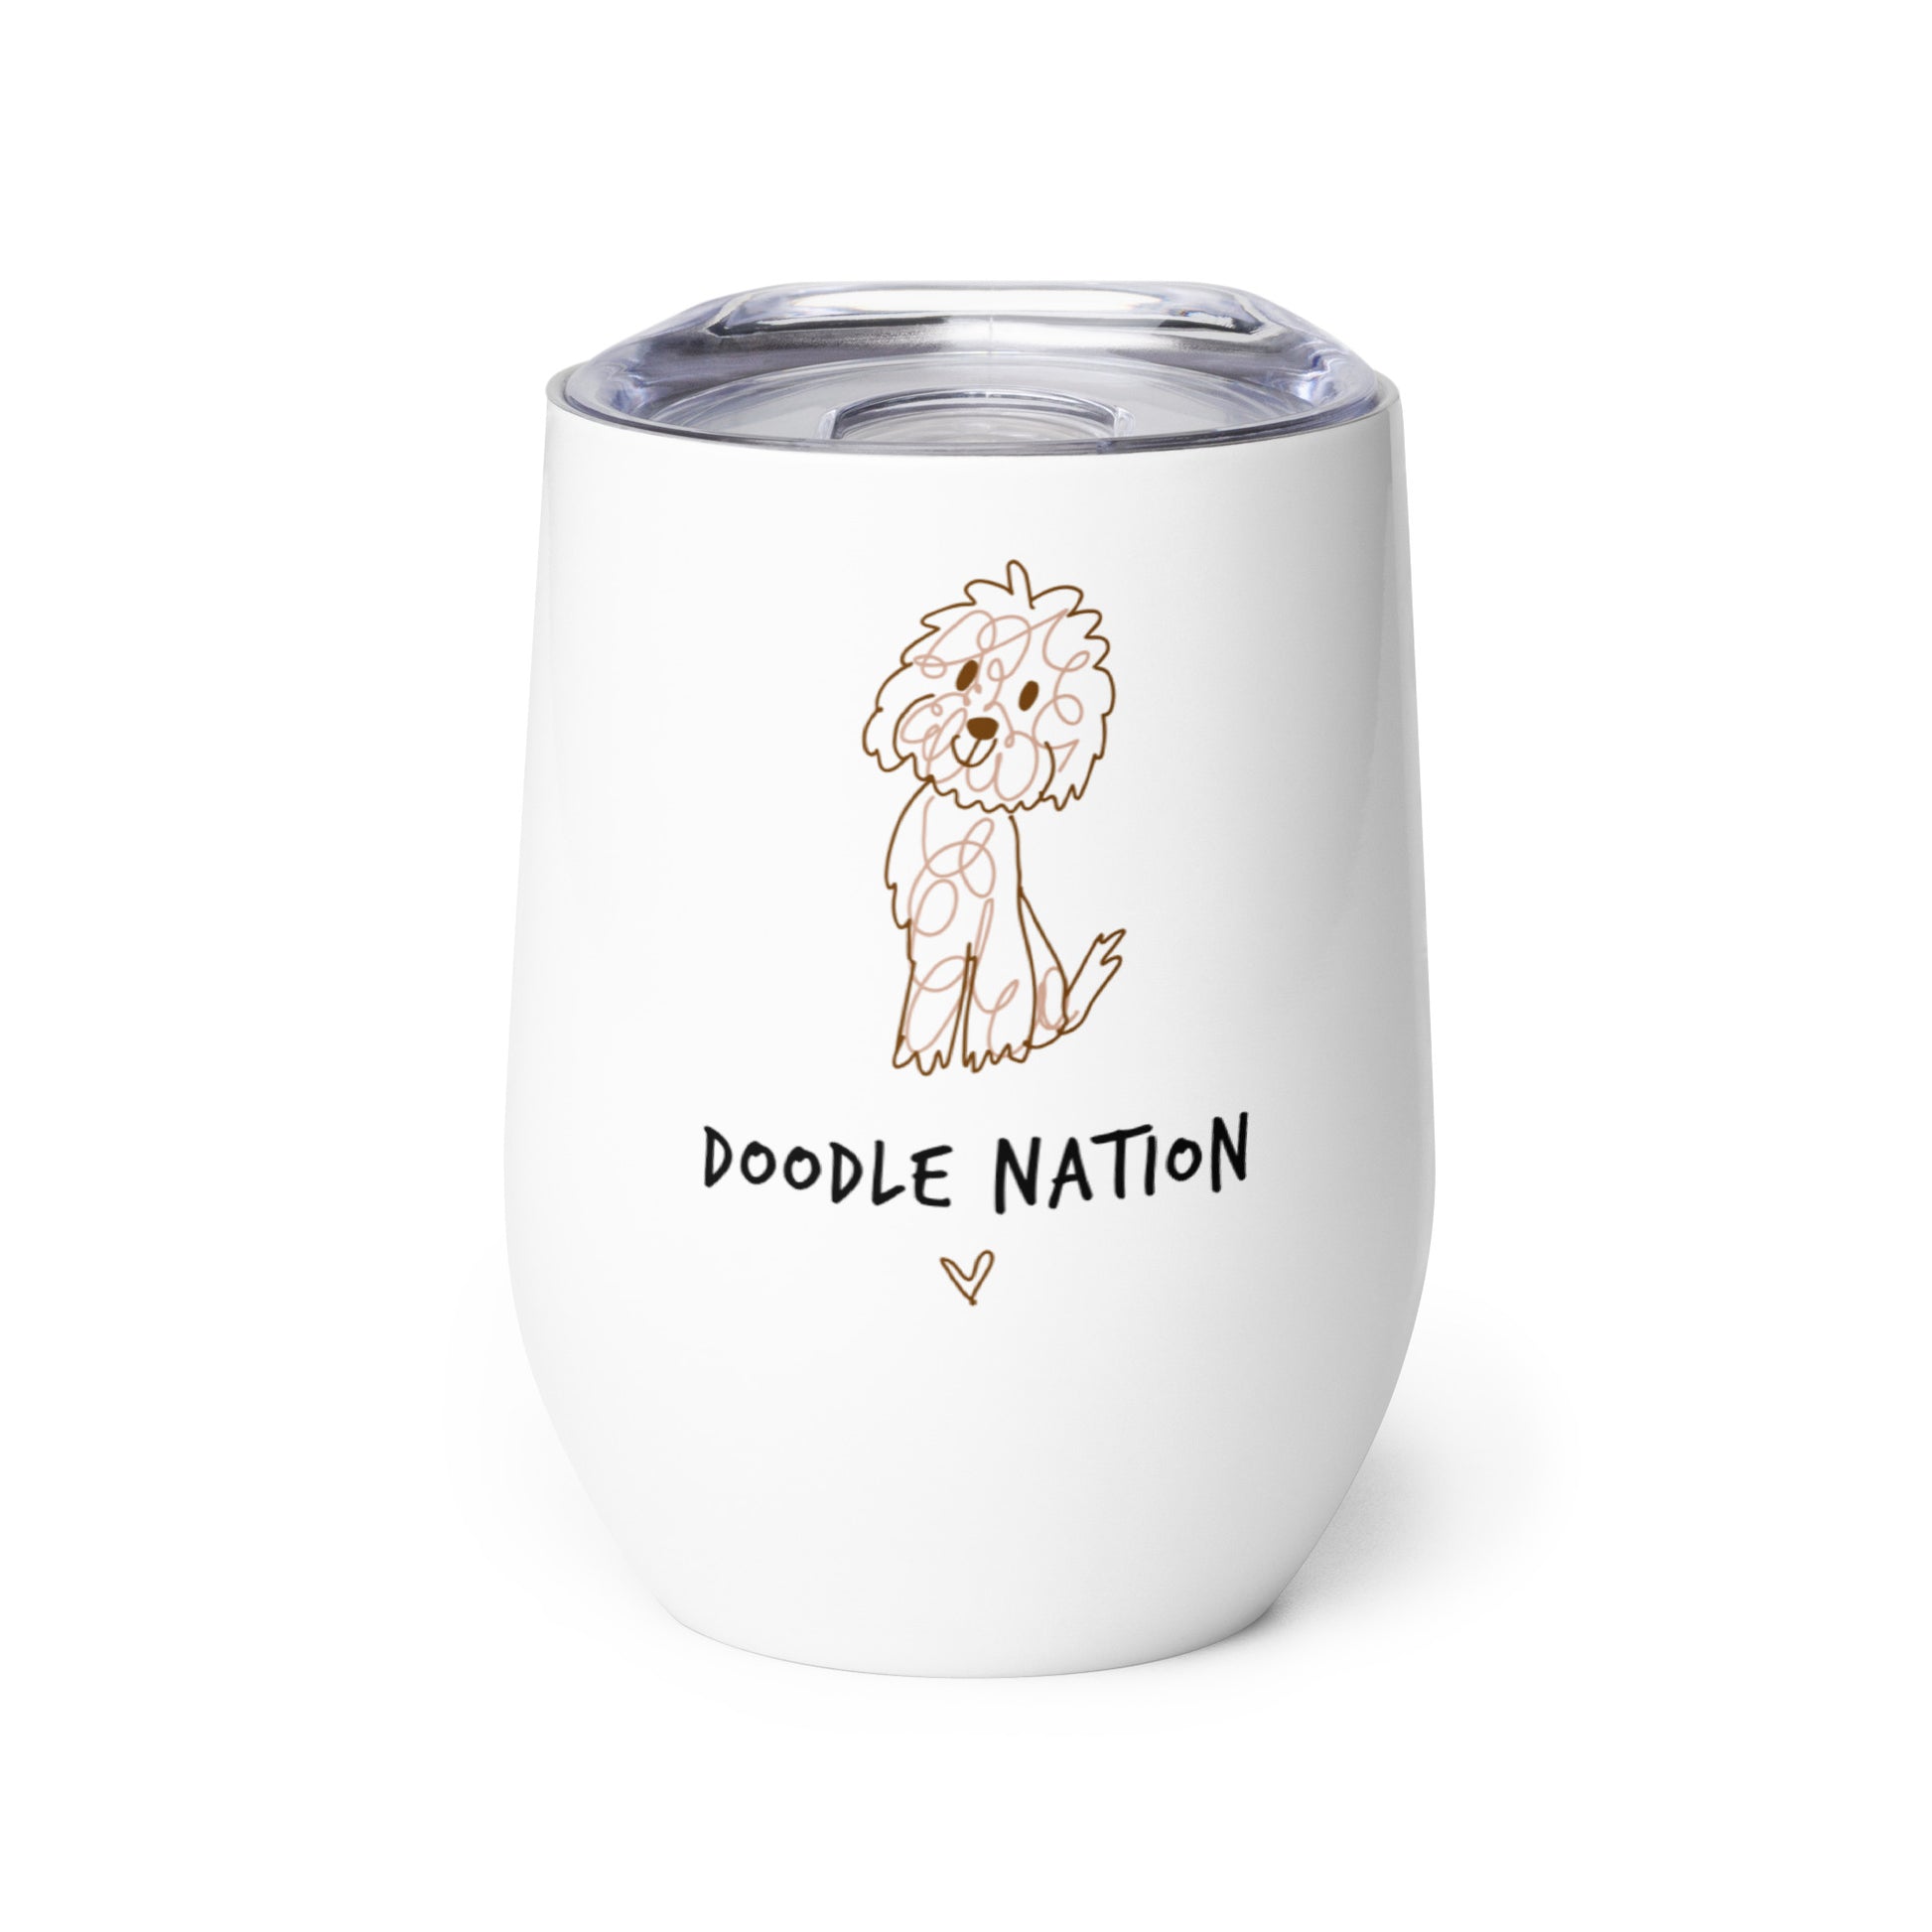 11 oz white wine tumbler with lid and dogs cute face and words doodle nation